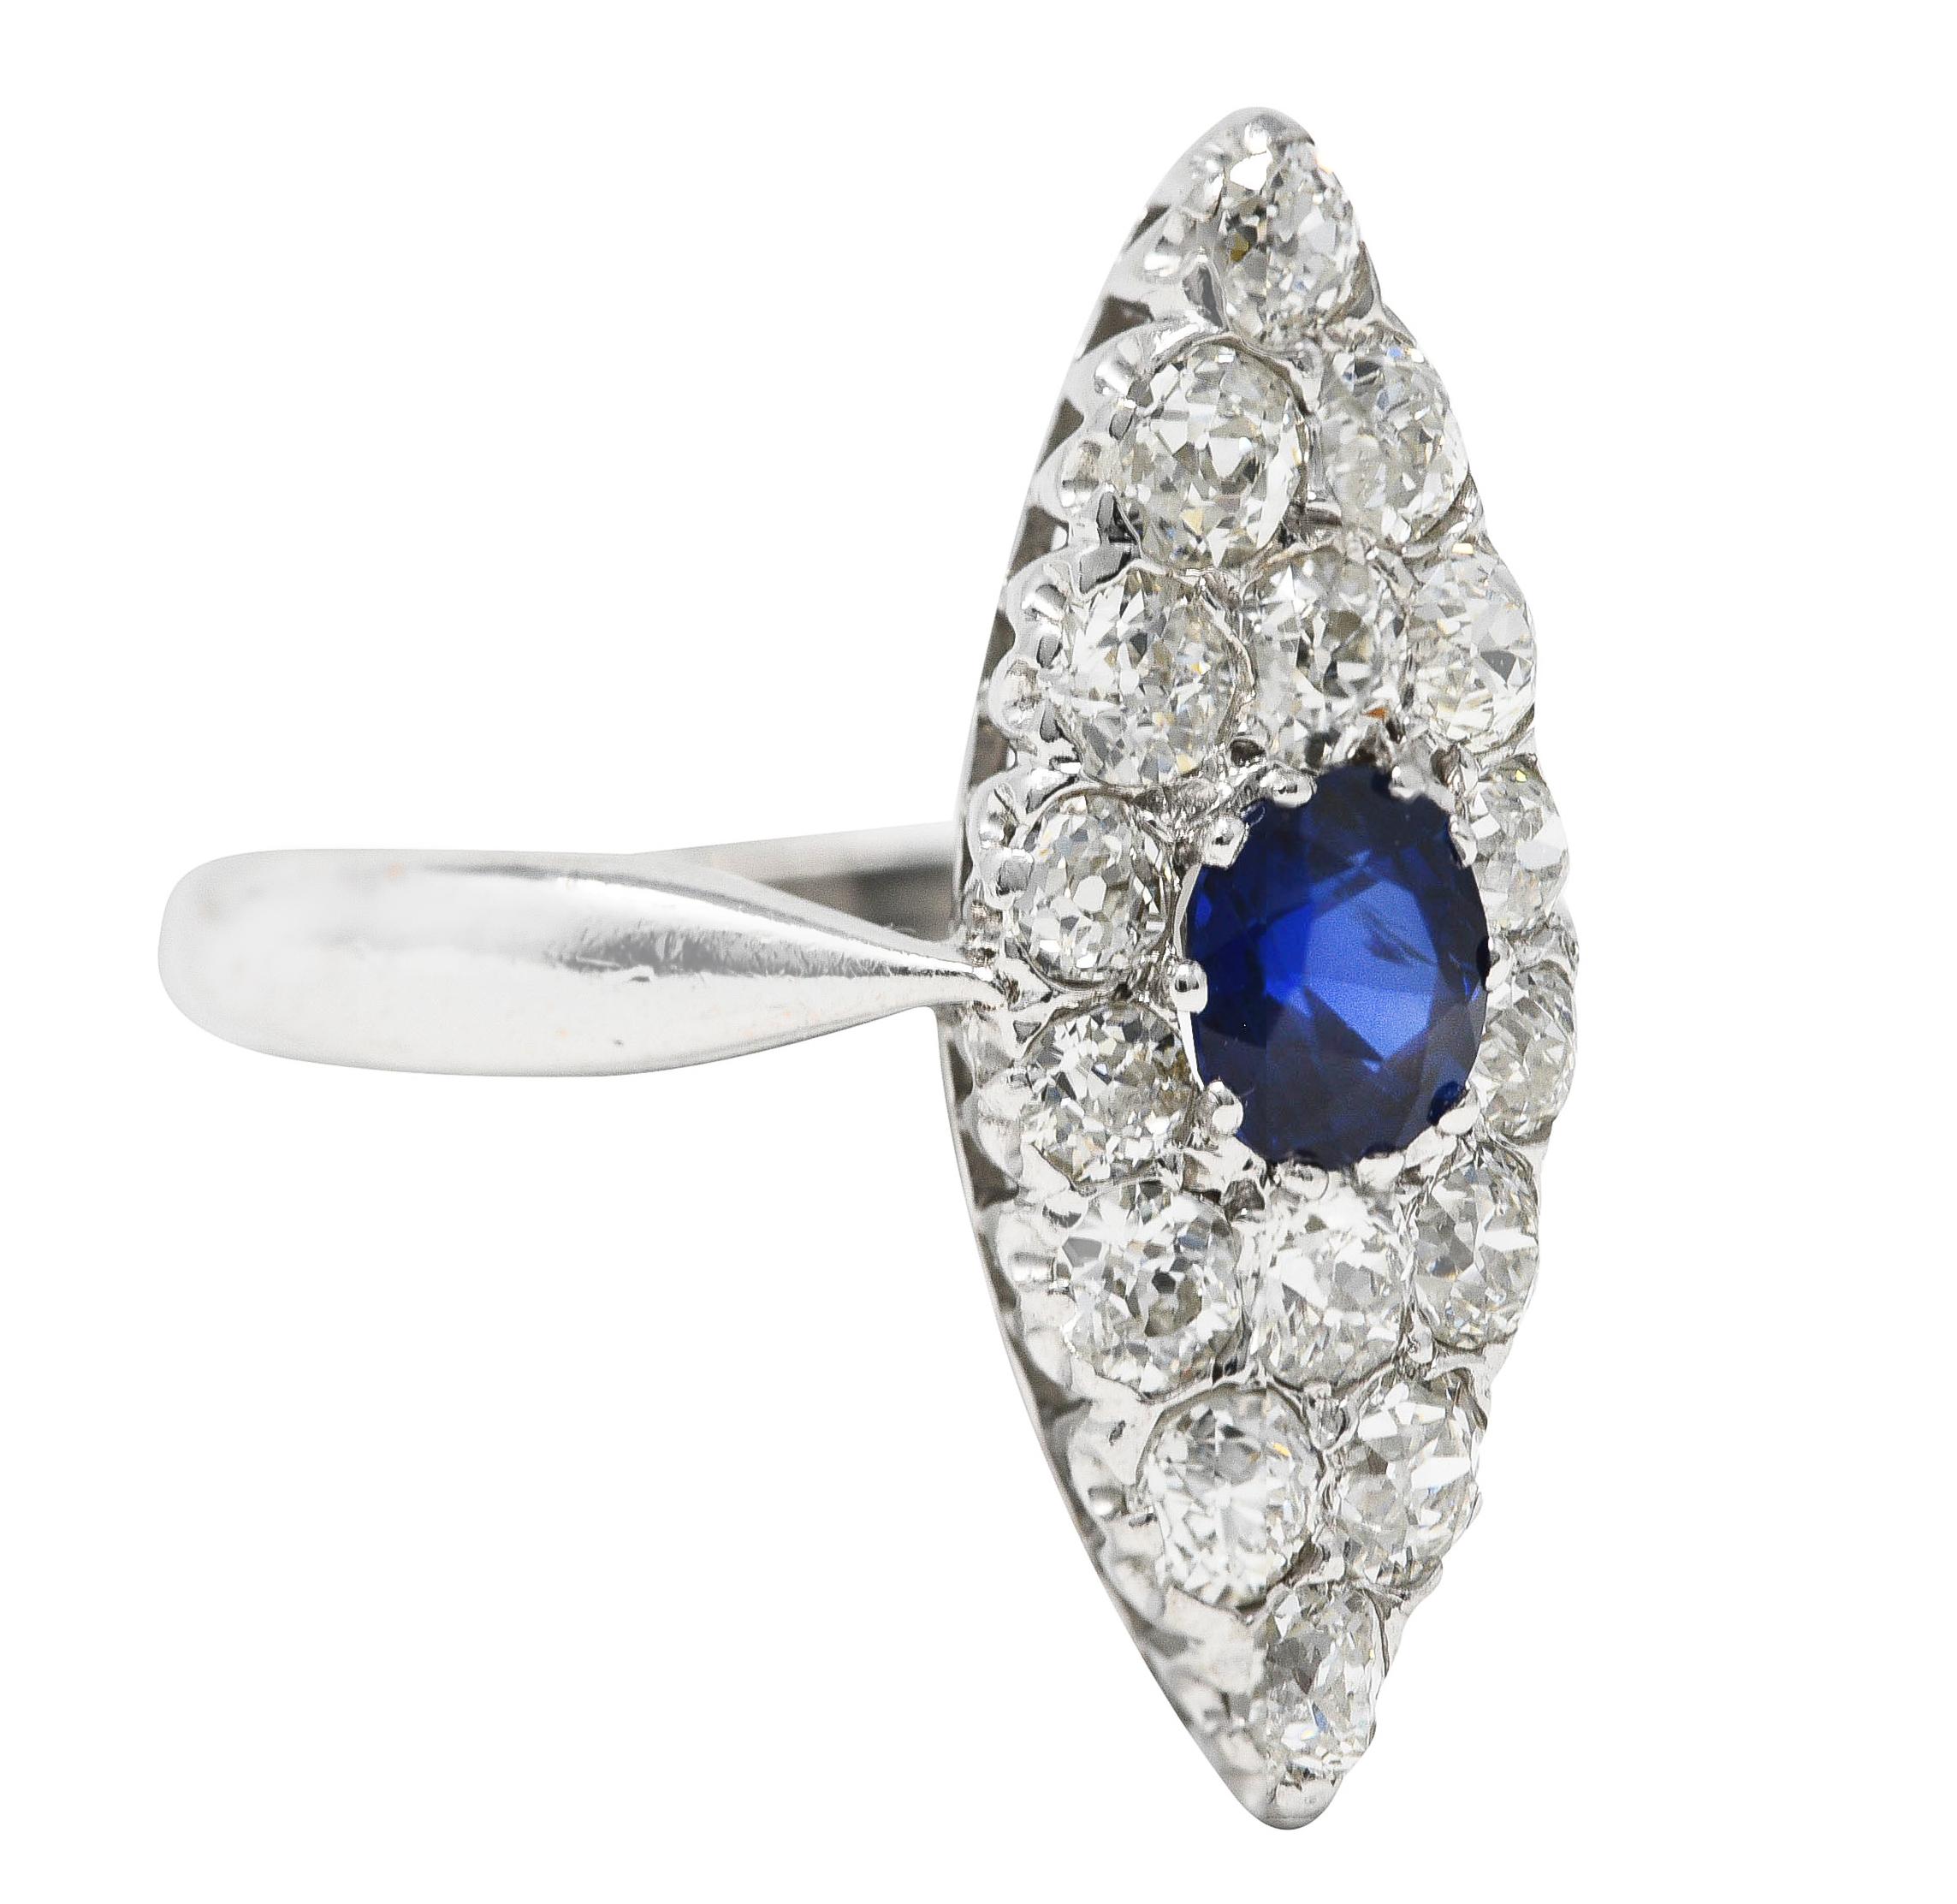 Centering a cushion cut sapphire weighing approximately 0.60 carat total - transparent medium ultramarine blue. Prong set in a navette shaped surround with old mine cut diamonds pavé set throughout. Weighing approximately 0.96 carat total - H/I